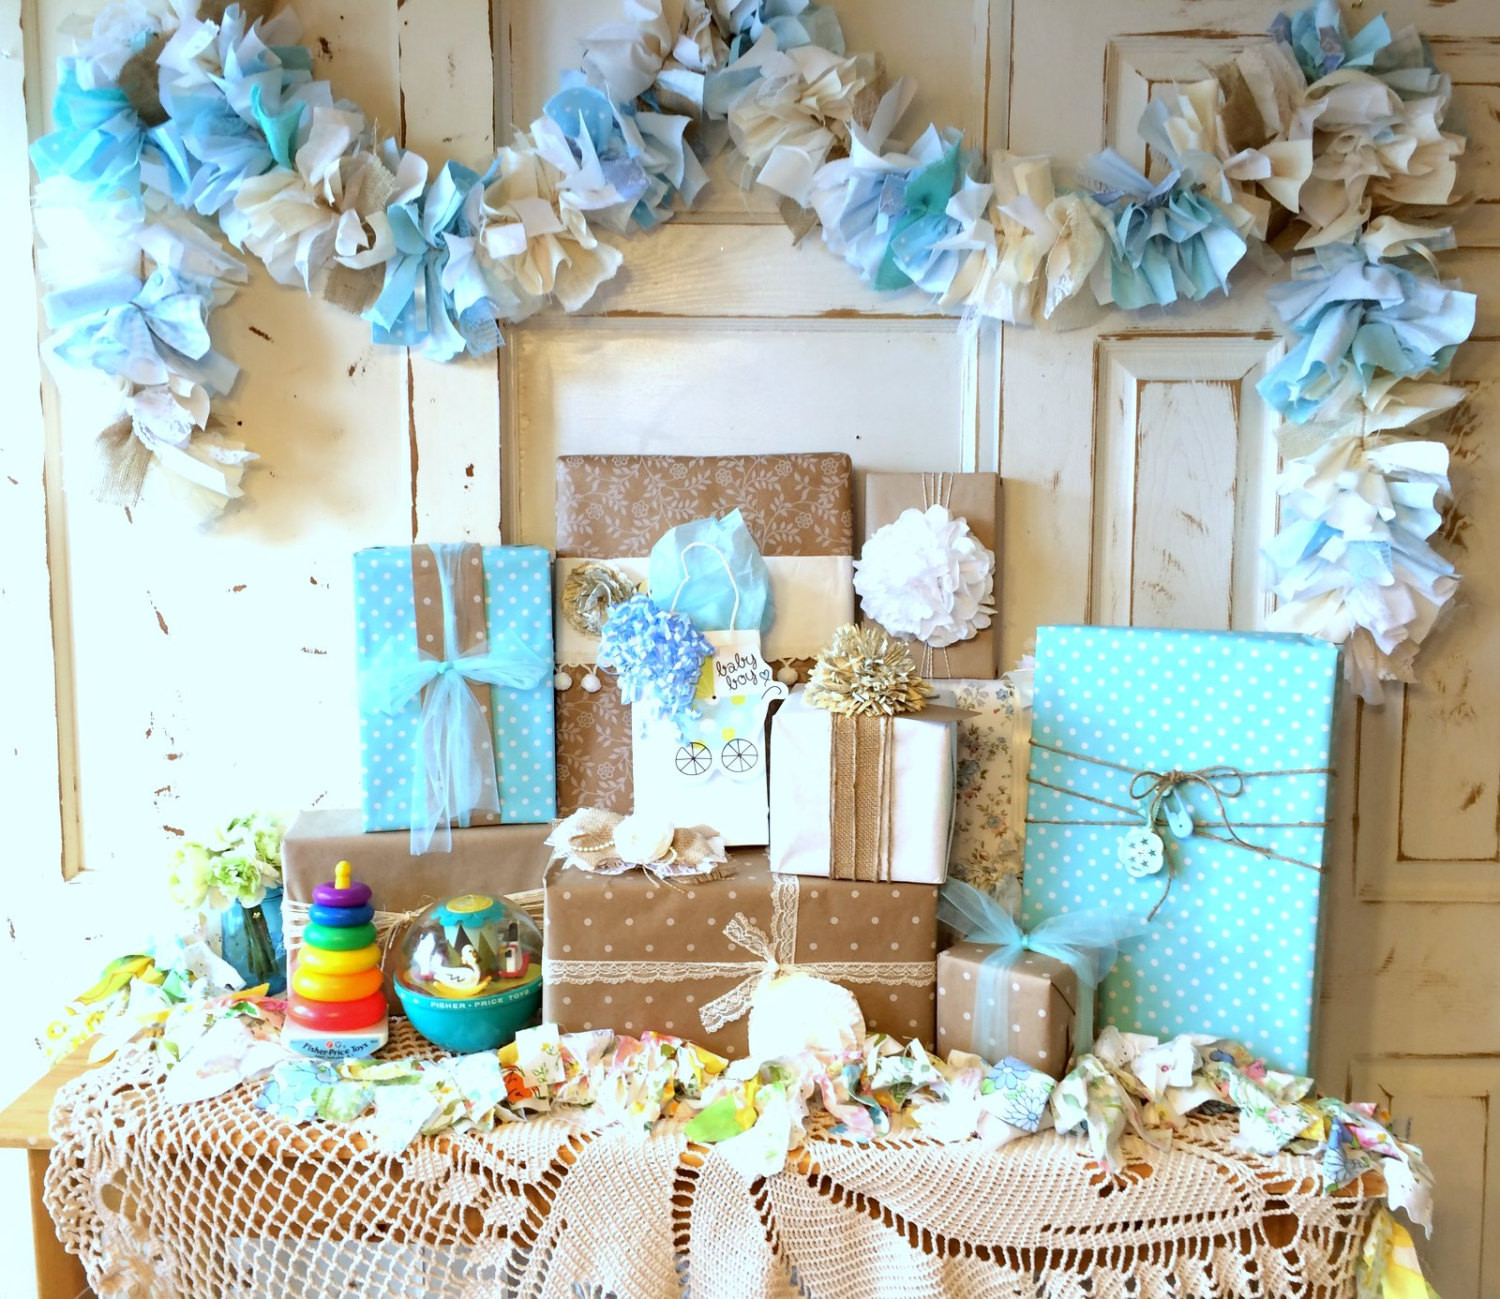 Baby Bathroom Decor
 Burlap and blue Baby Shower Party Decoration 6 10 foot fabric